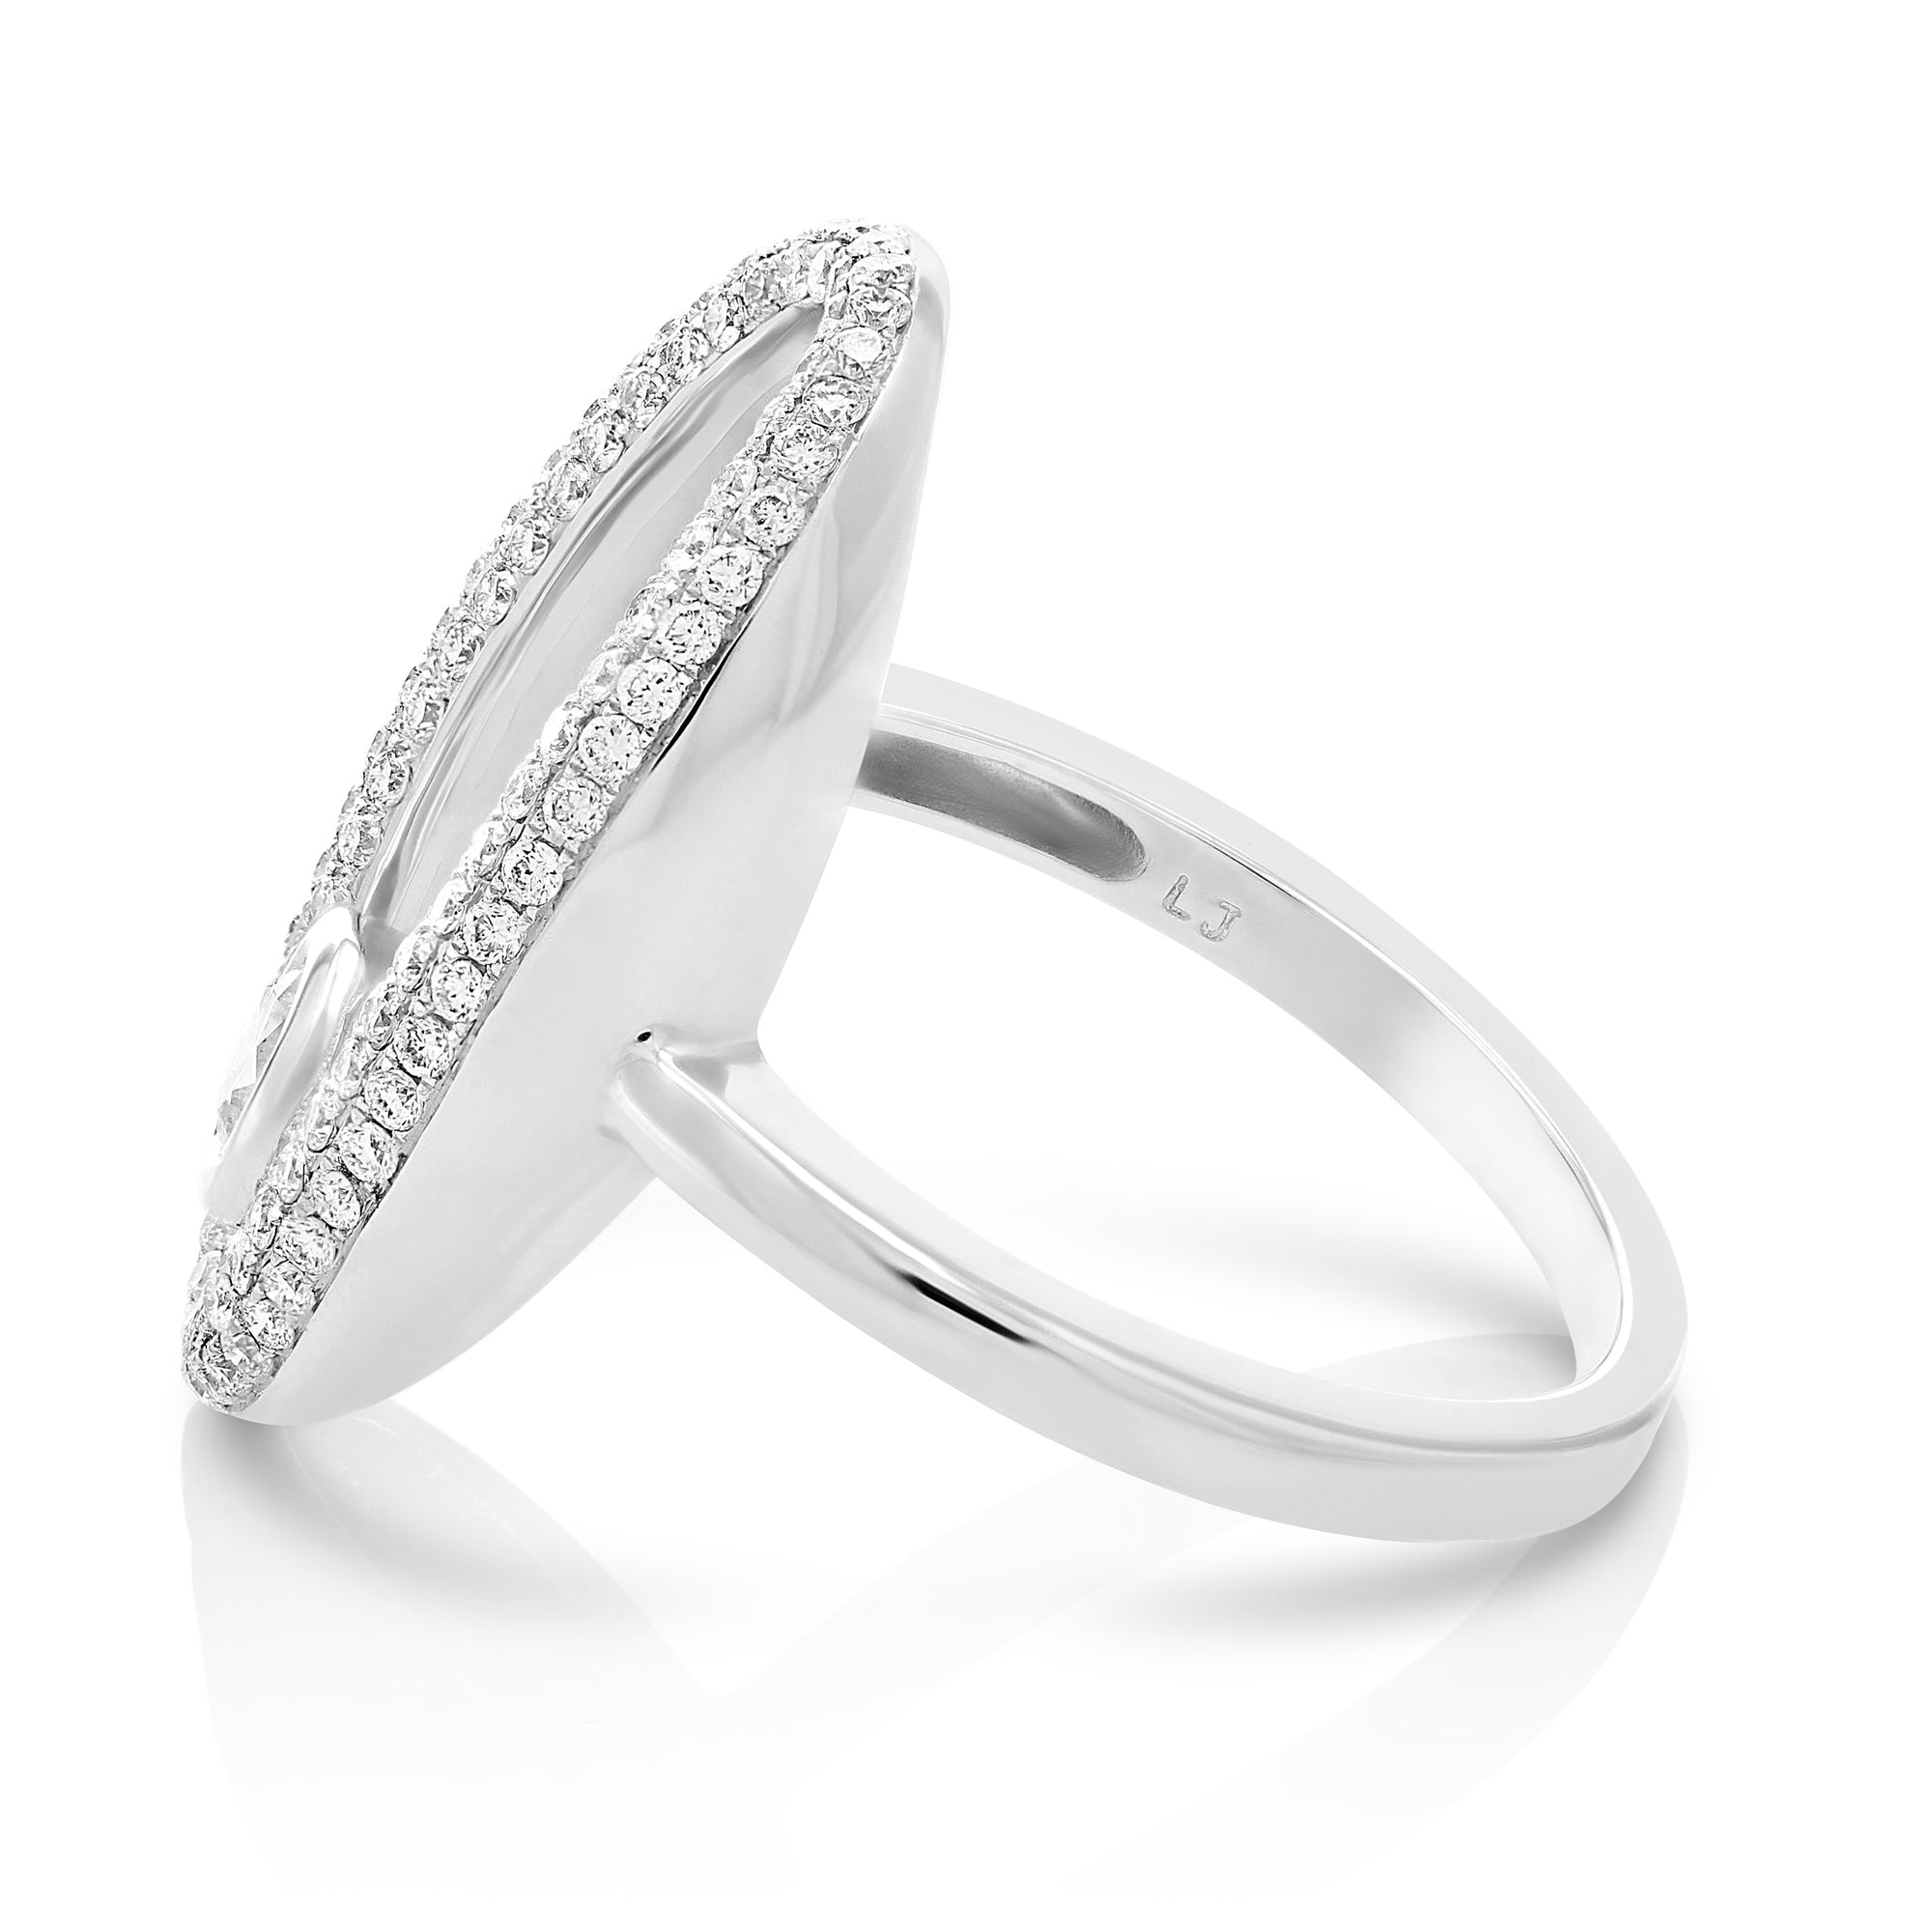 0.90 cttw SI1-SI2 18K White Gold Diamond Oval Ring Engagement Bridal Size 7